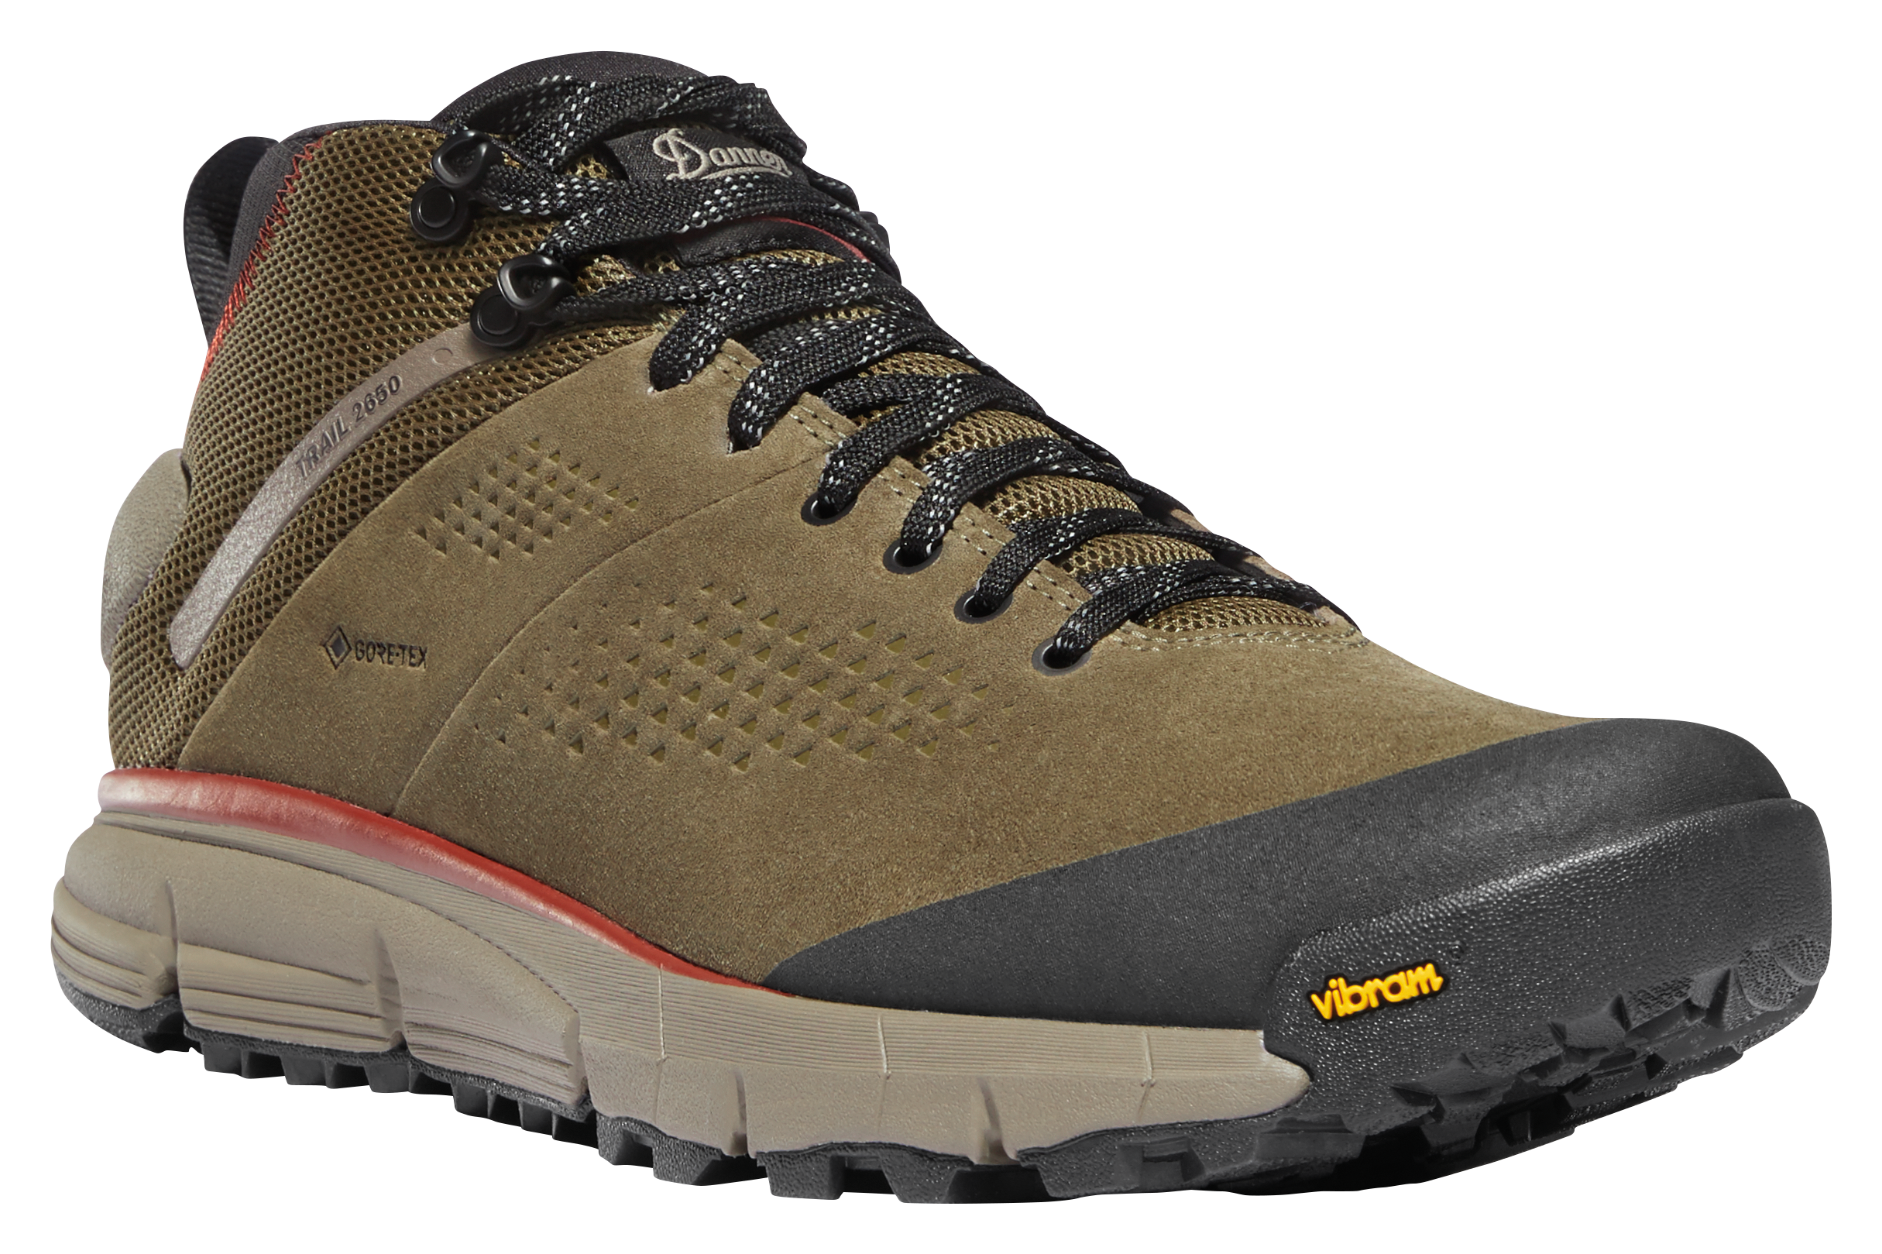 Danner Trail 2650 Mid Suede GORE-TEX Hiking Boots for Men